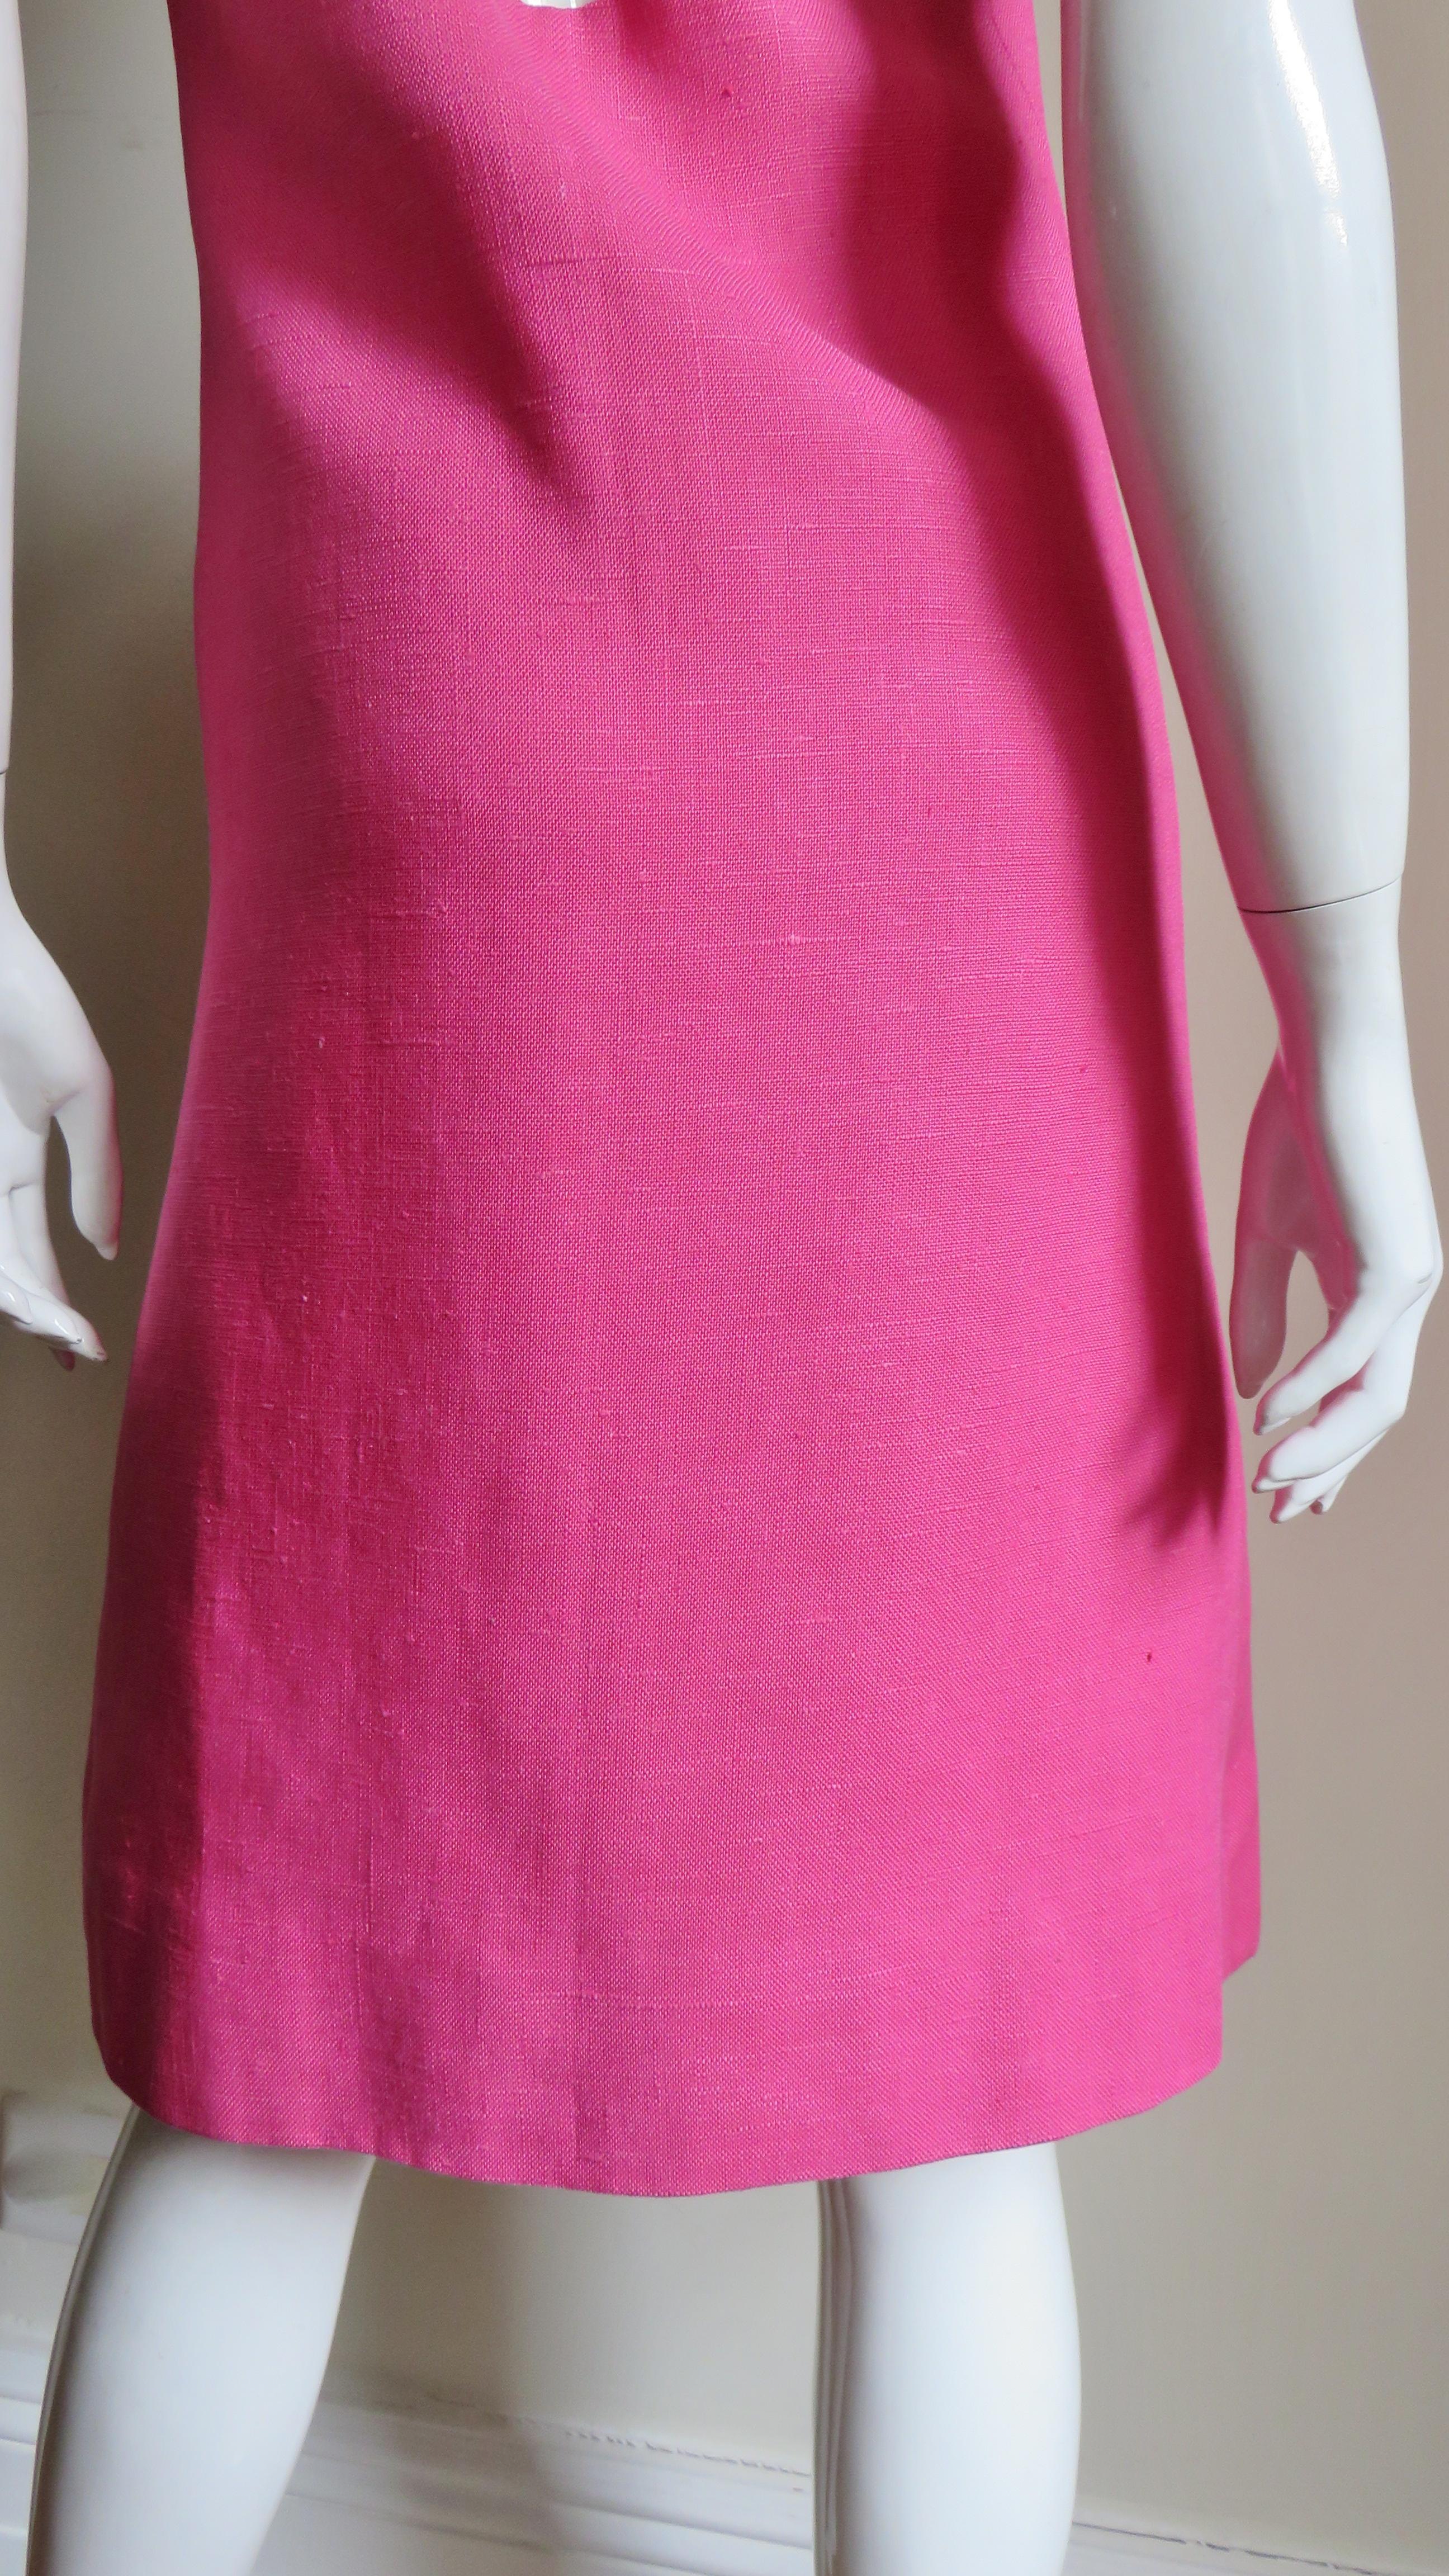 B H Wragge 1967 Linen Dress with Cutout Back For Sale 5